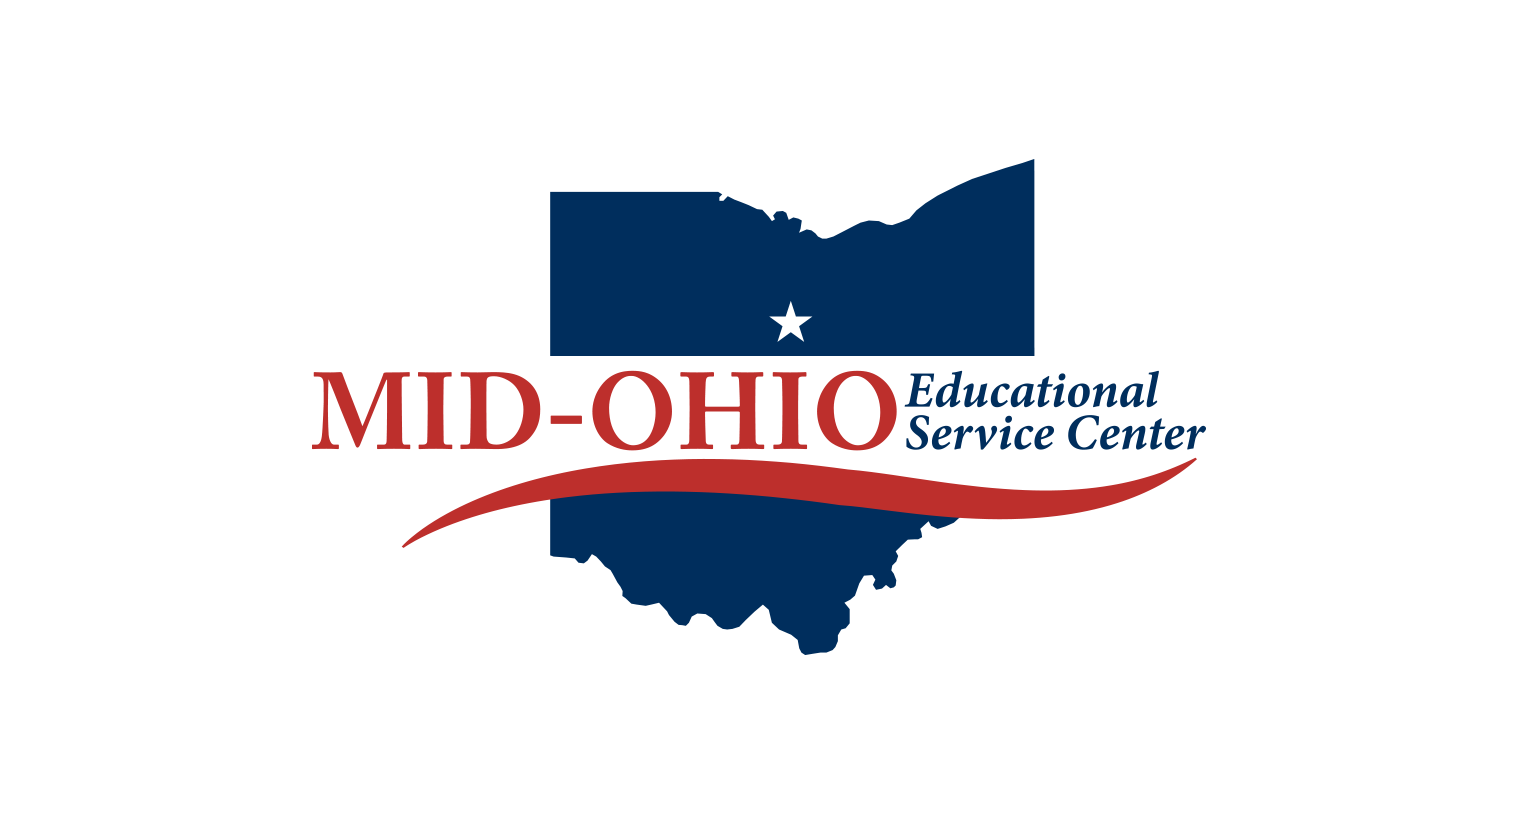 Mid-Ohio ESC Business Advisory Council is honored with a three-star award